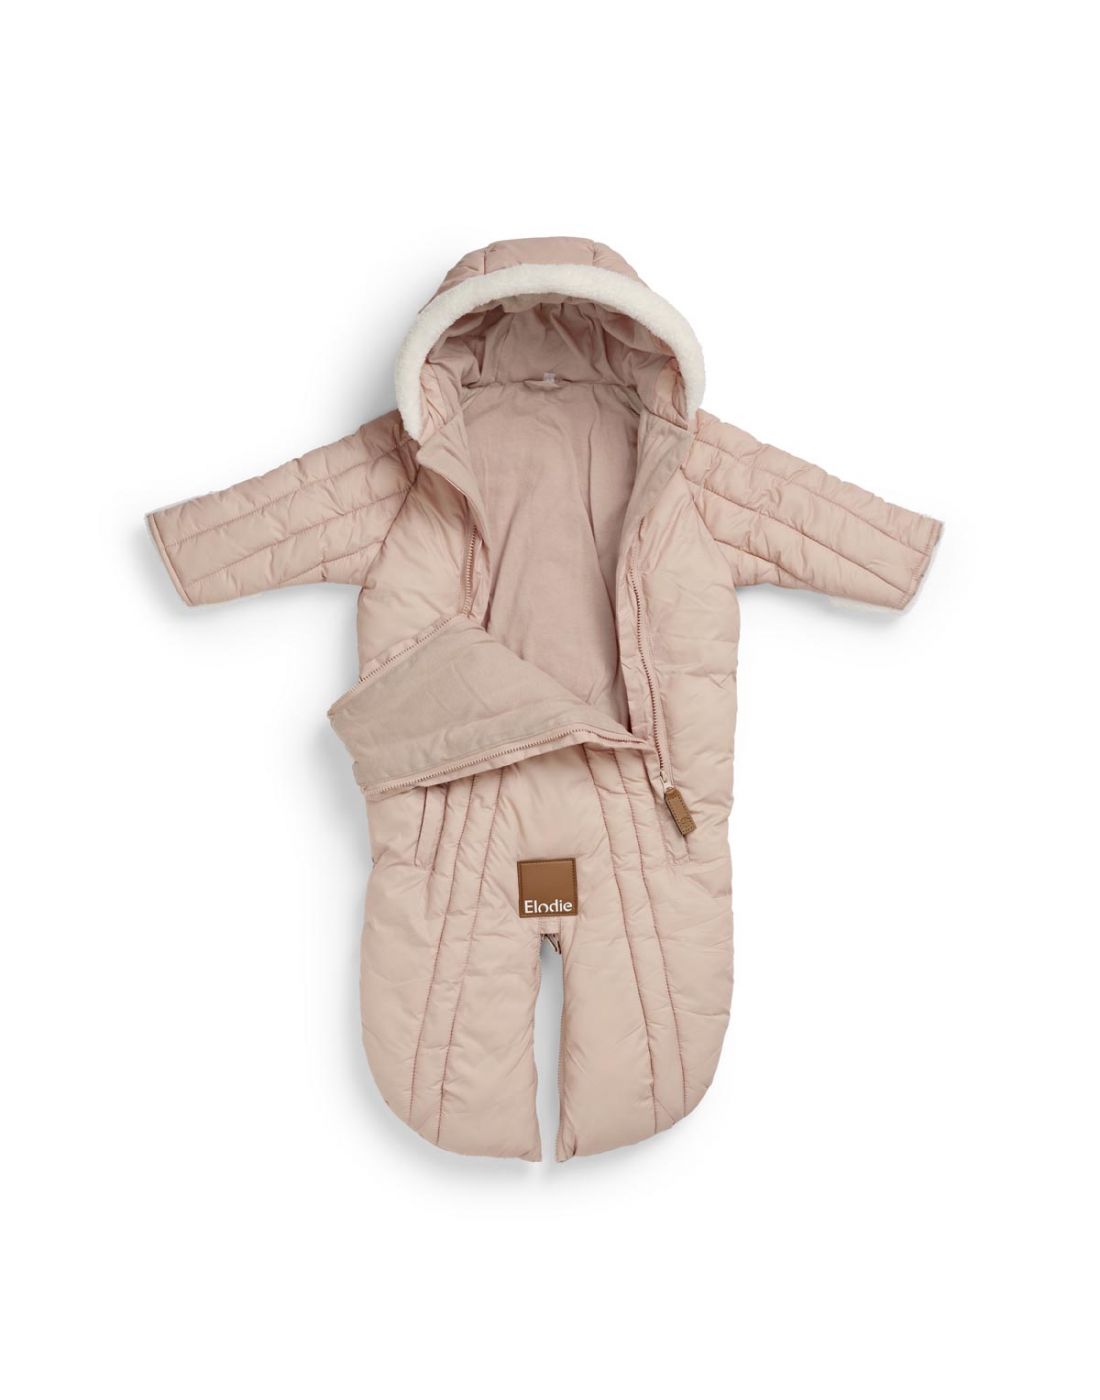 Elodie Baby Overall 6-12m Blushing Pink